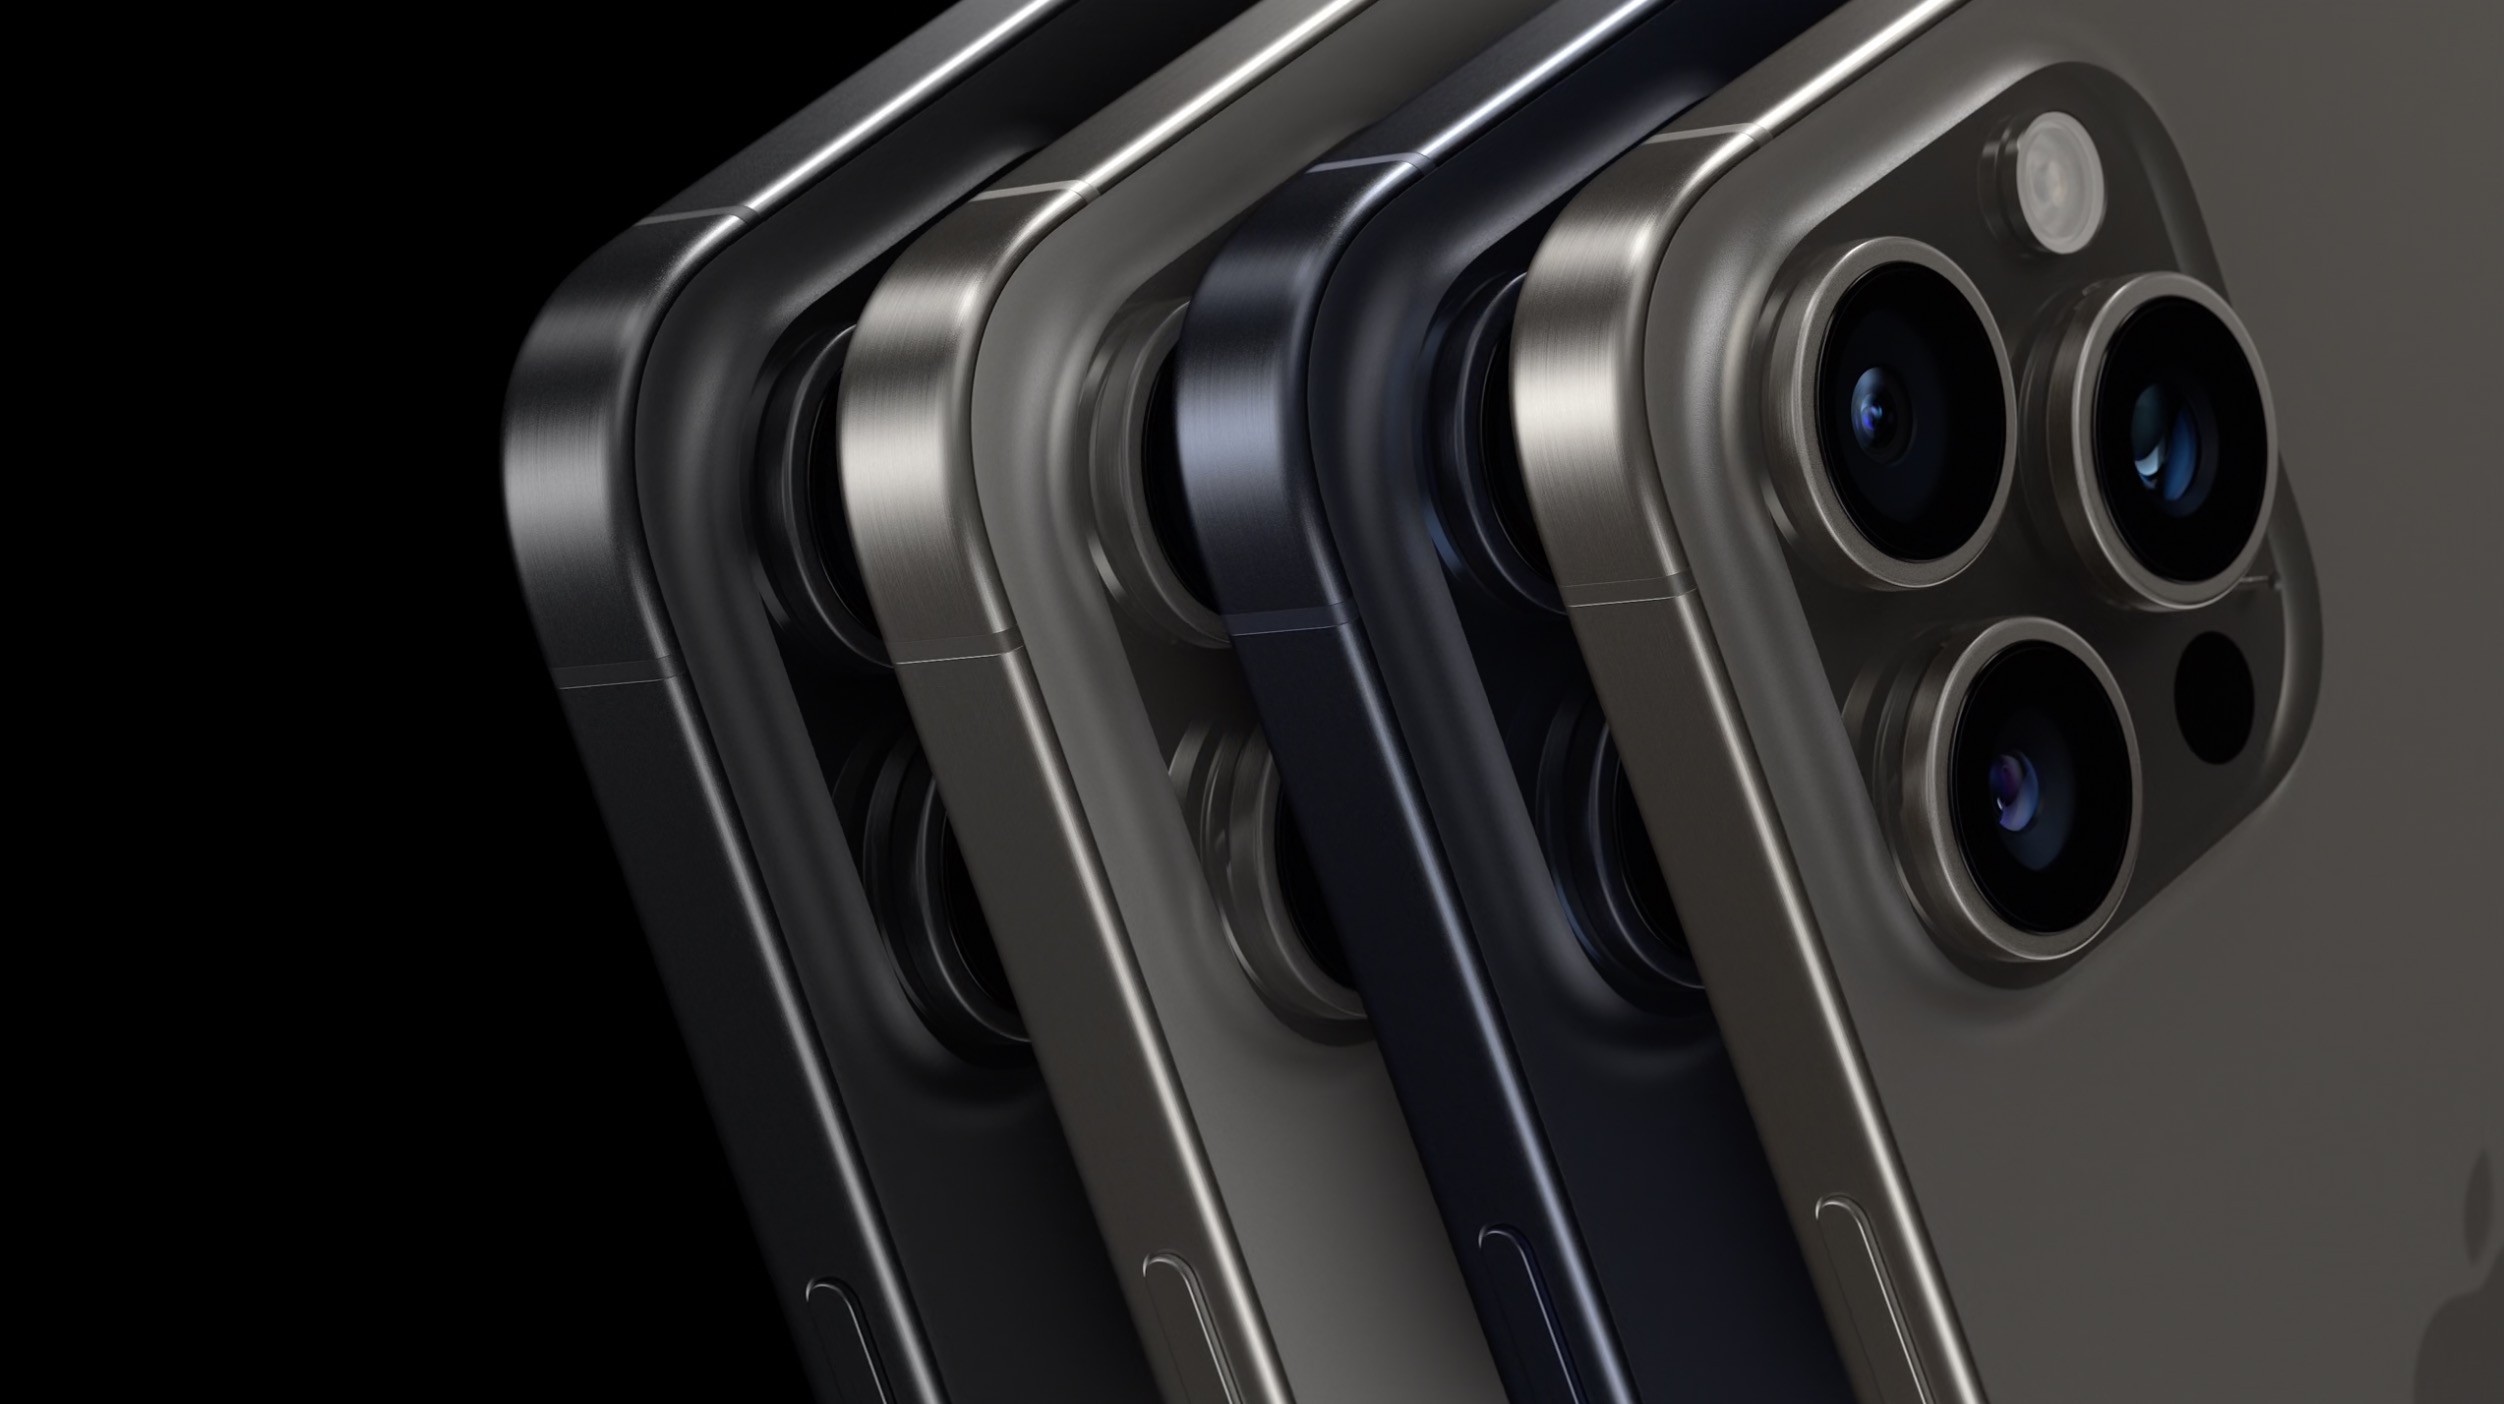 In an ocean of leaks, the iPhone 15 cameras managed to sneak in a few surprises